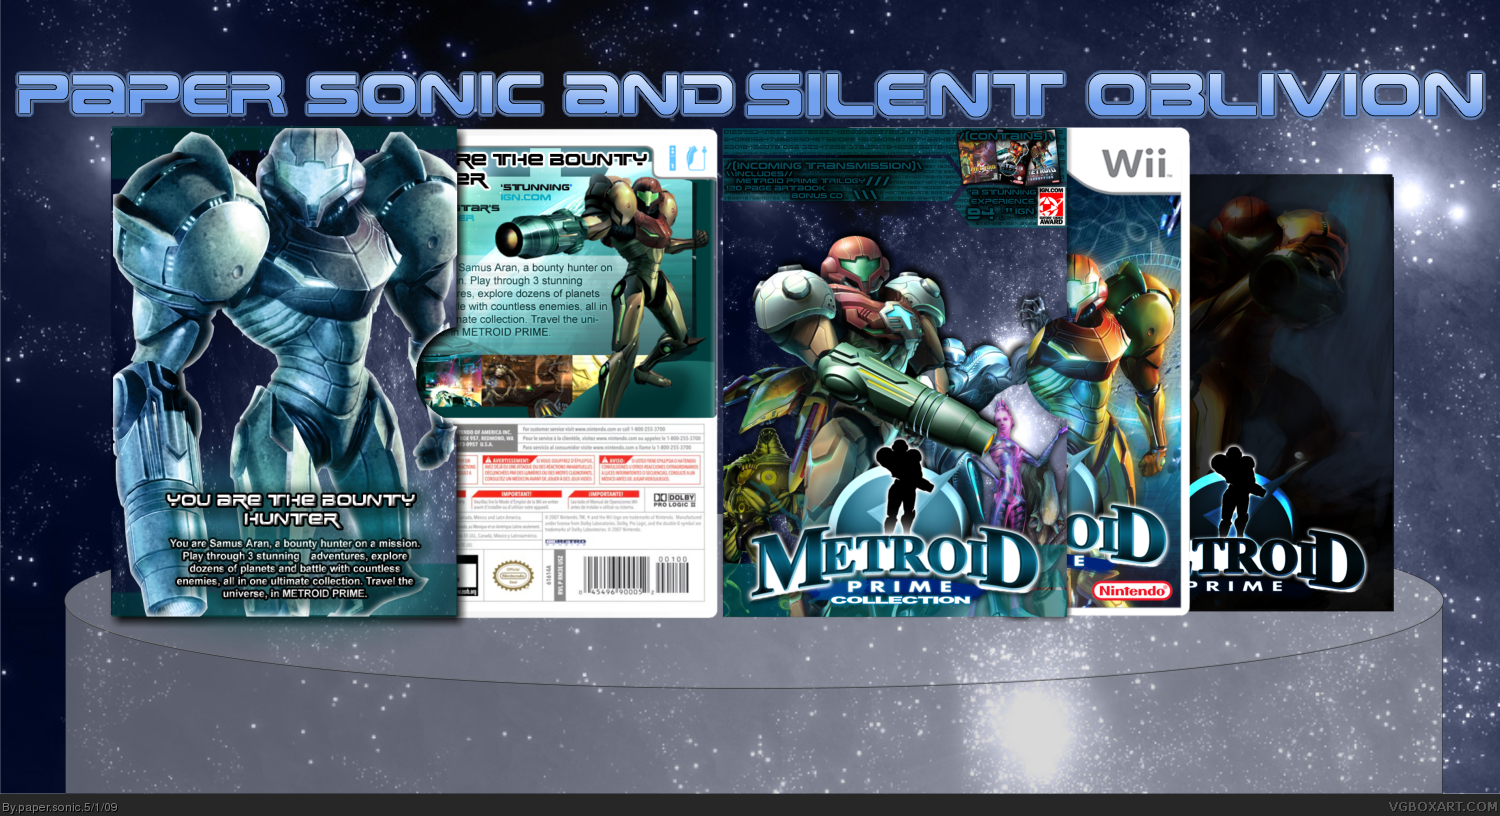 Metroid Prime Collection box cover